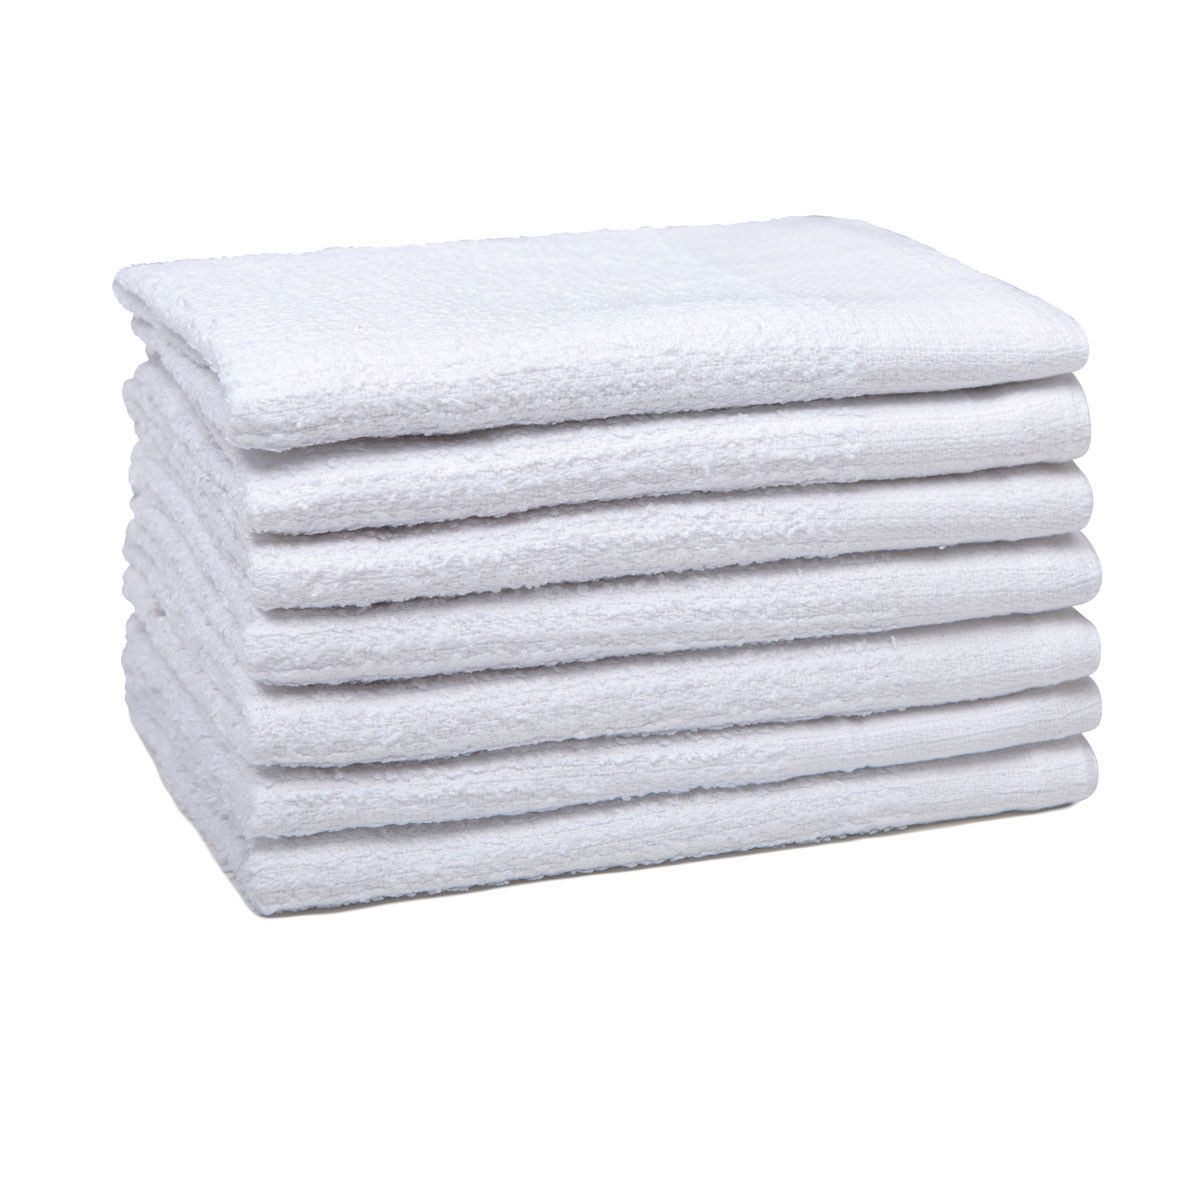 Which bar towels constructions are available for Wholesale Bar Mop Towels by Intralin?